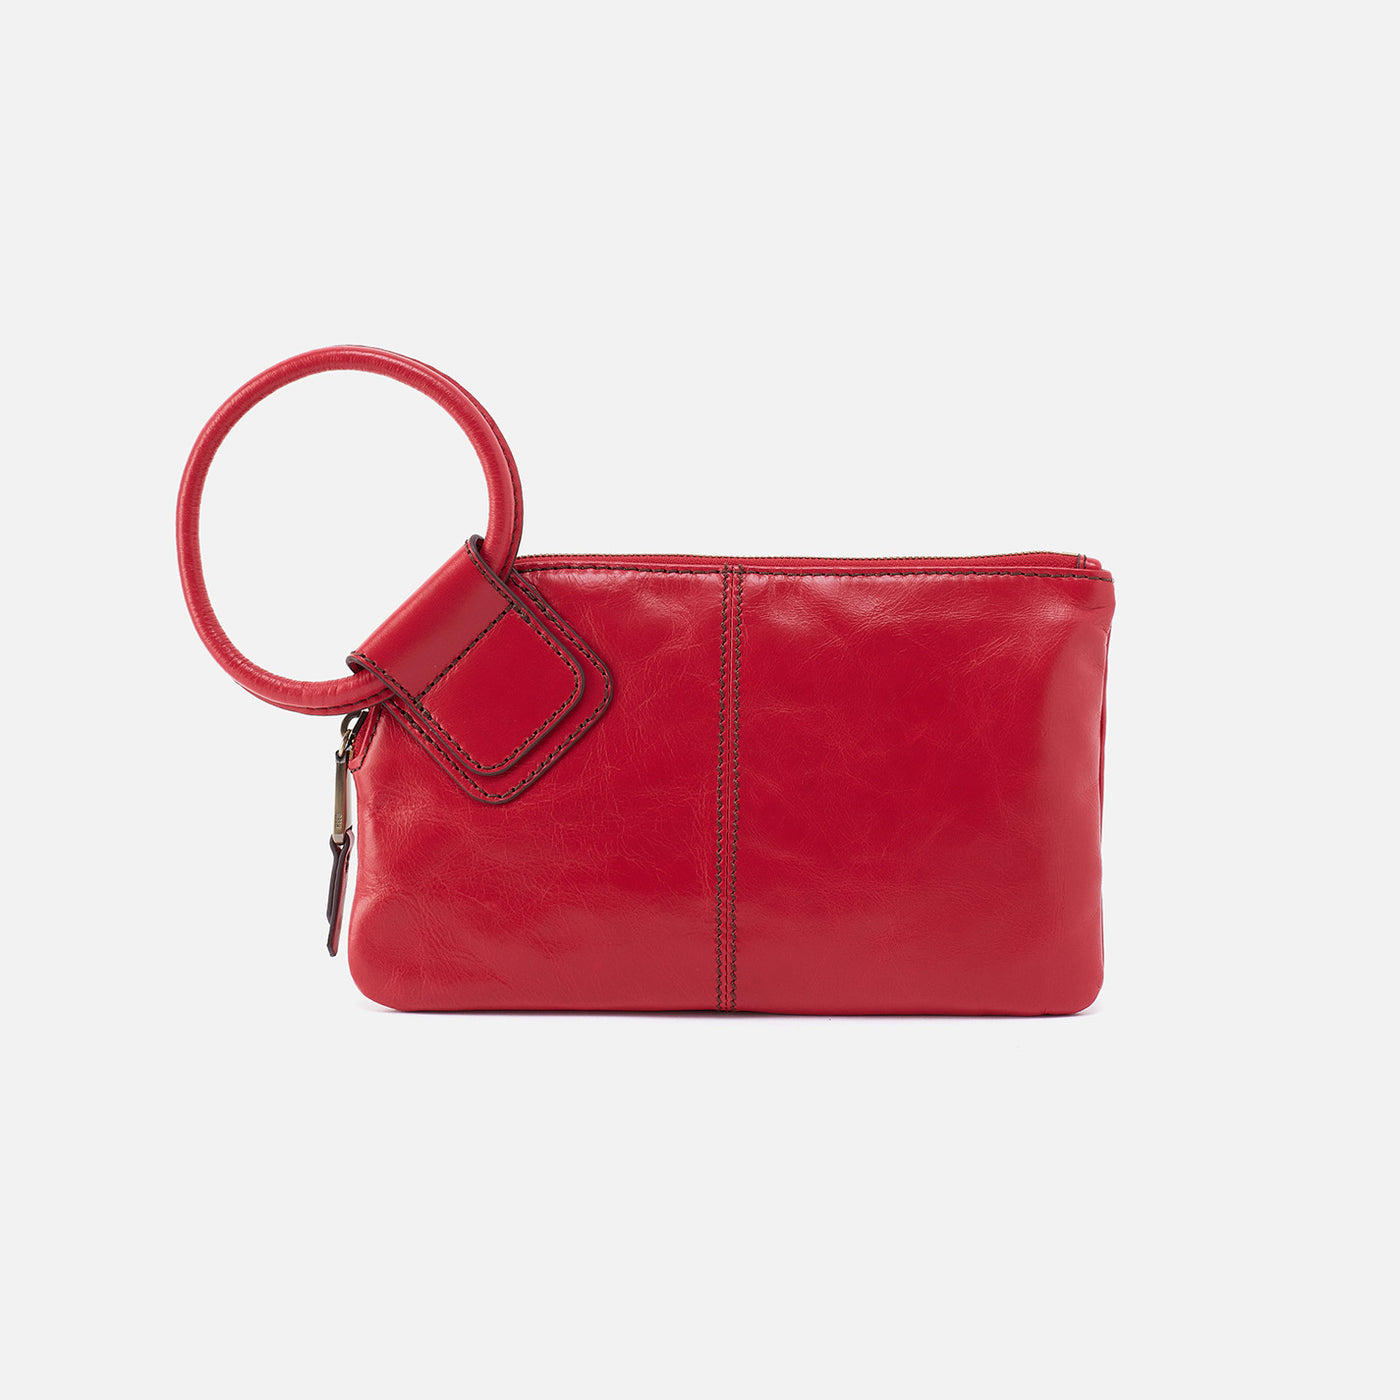 Sable Clutch In Polished Leather - Hibiscus